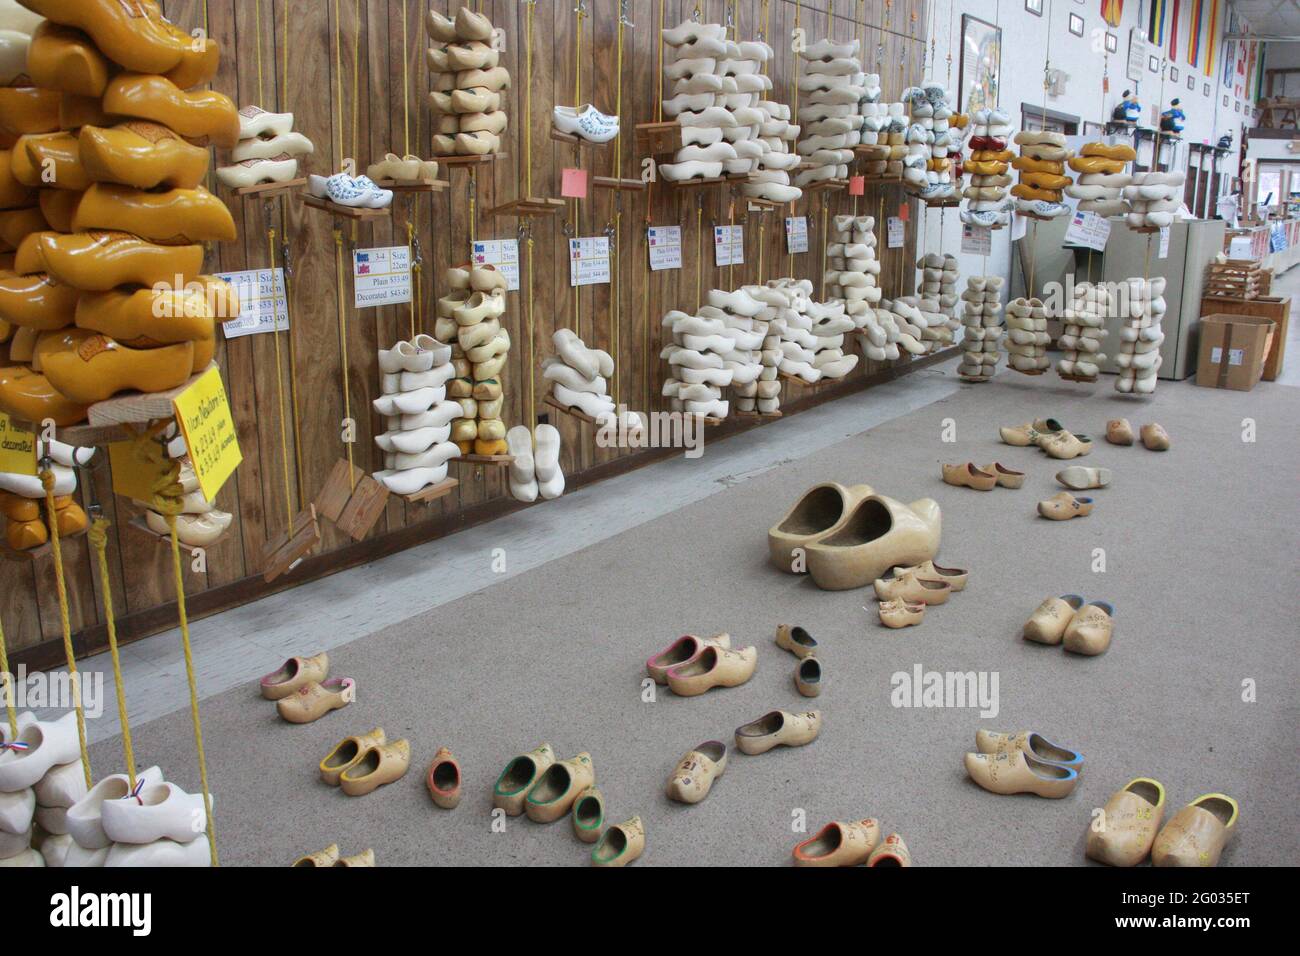 Holland, MI, USA. Traditional Dutch wooden shoes for sale at the De Klomp Wooden Shoe and Delft Factory. Stock Photo